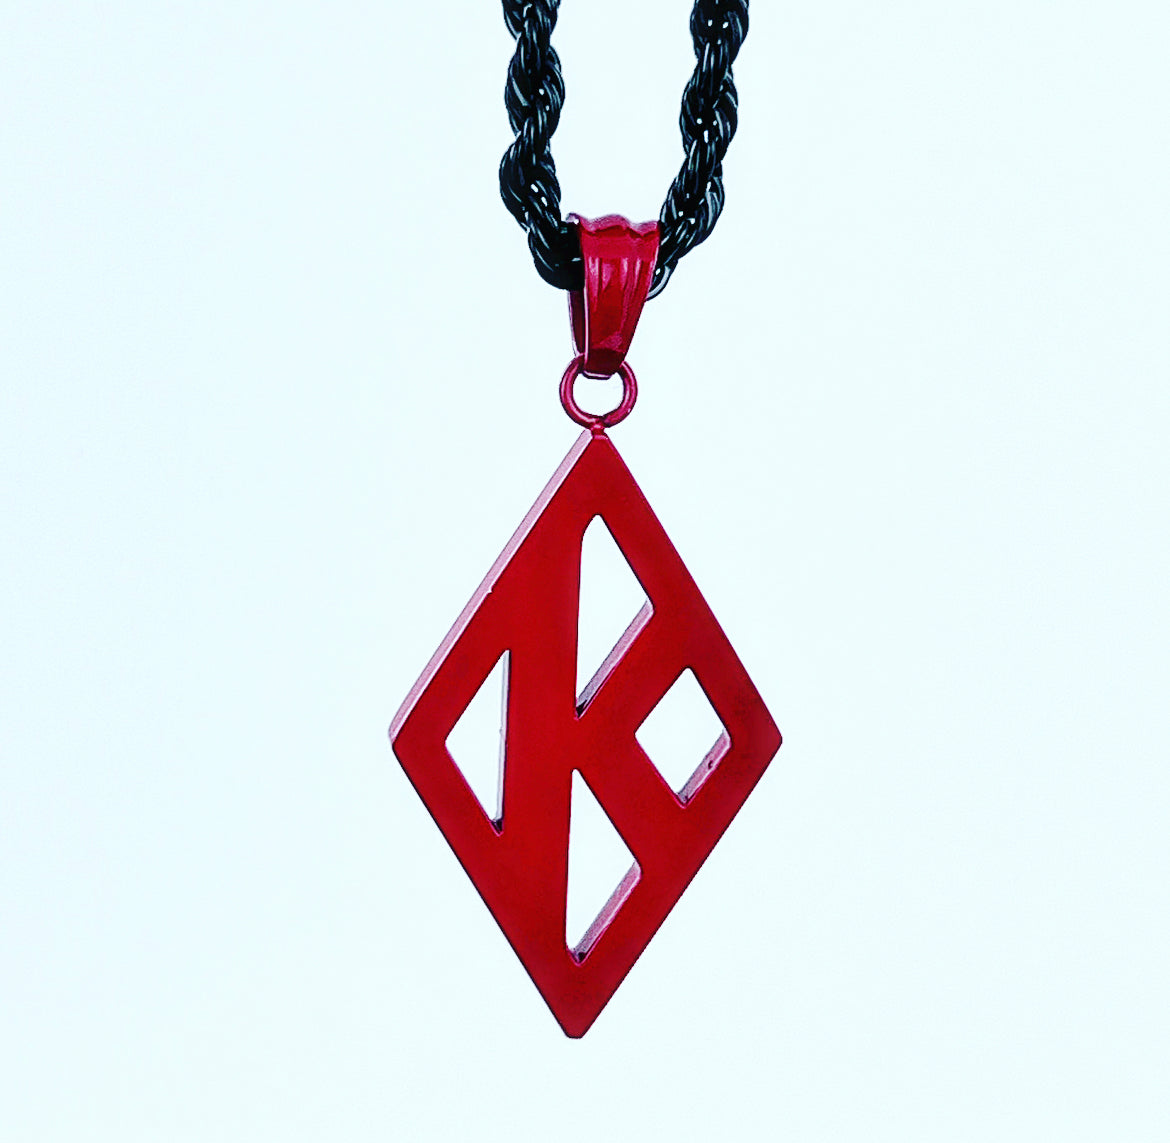 Kappa Alpha pendant made of stainless steel and is ion-plated 24K gold black coated with red paint. This pendant is solid with a flat back. 22-inch necklace. Pendant size is 1.25 inches in height, 1 inch wide and weighs approximately 2oz.